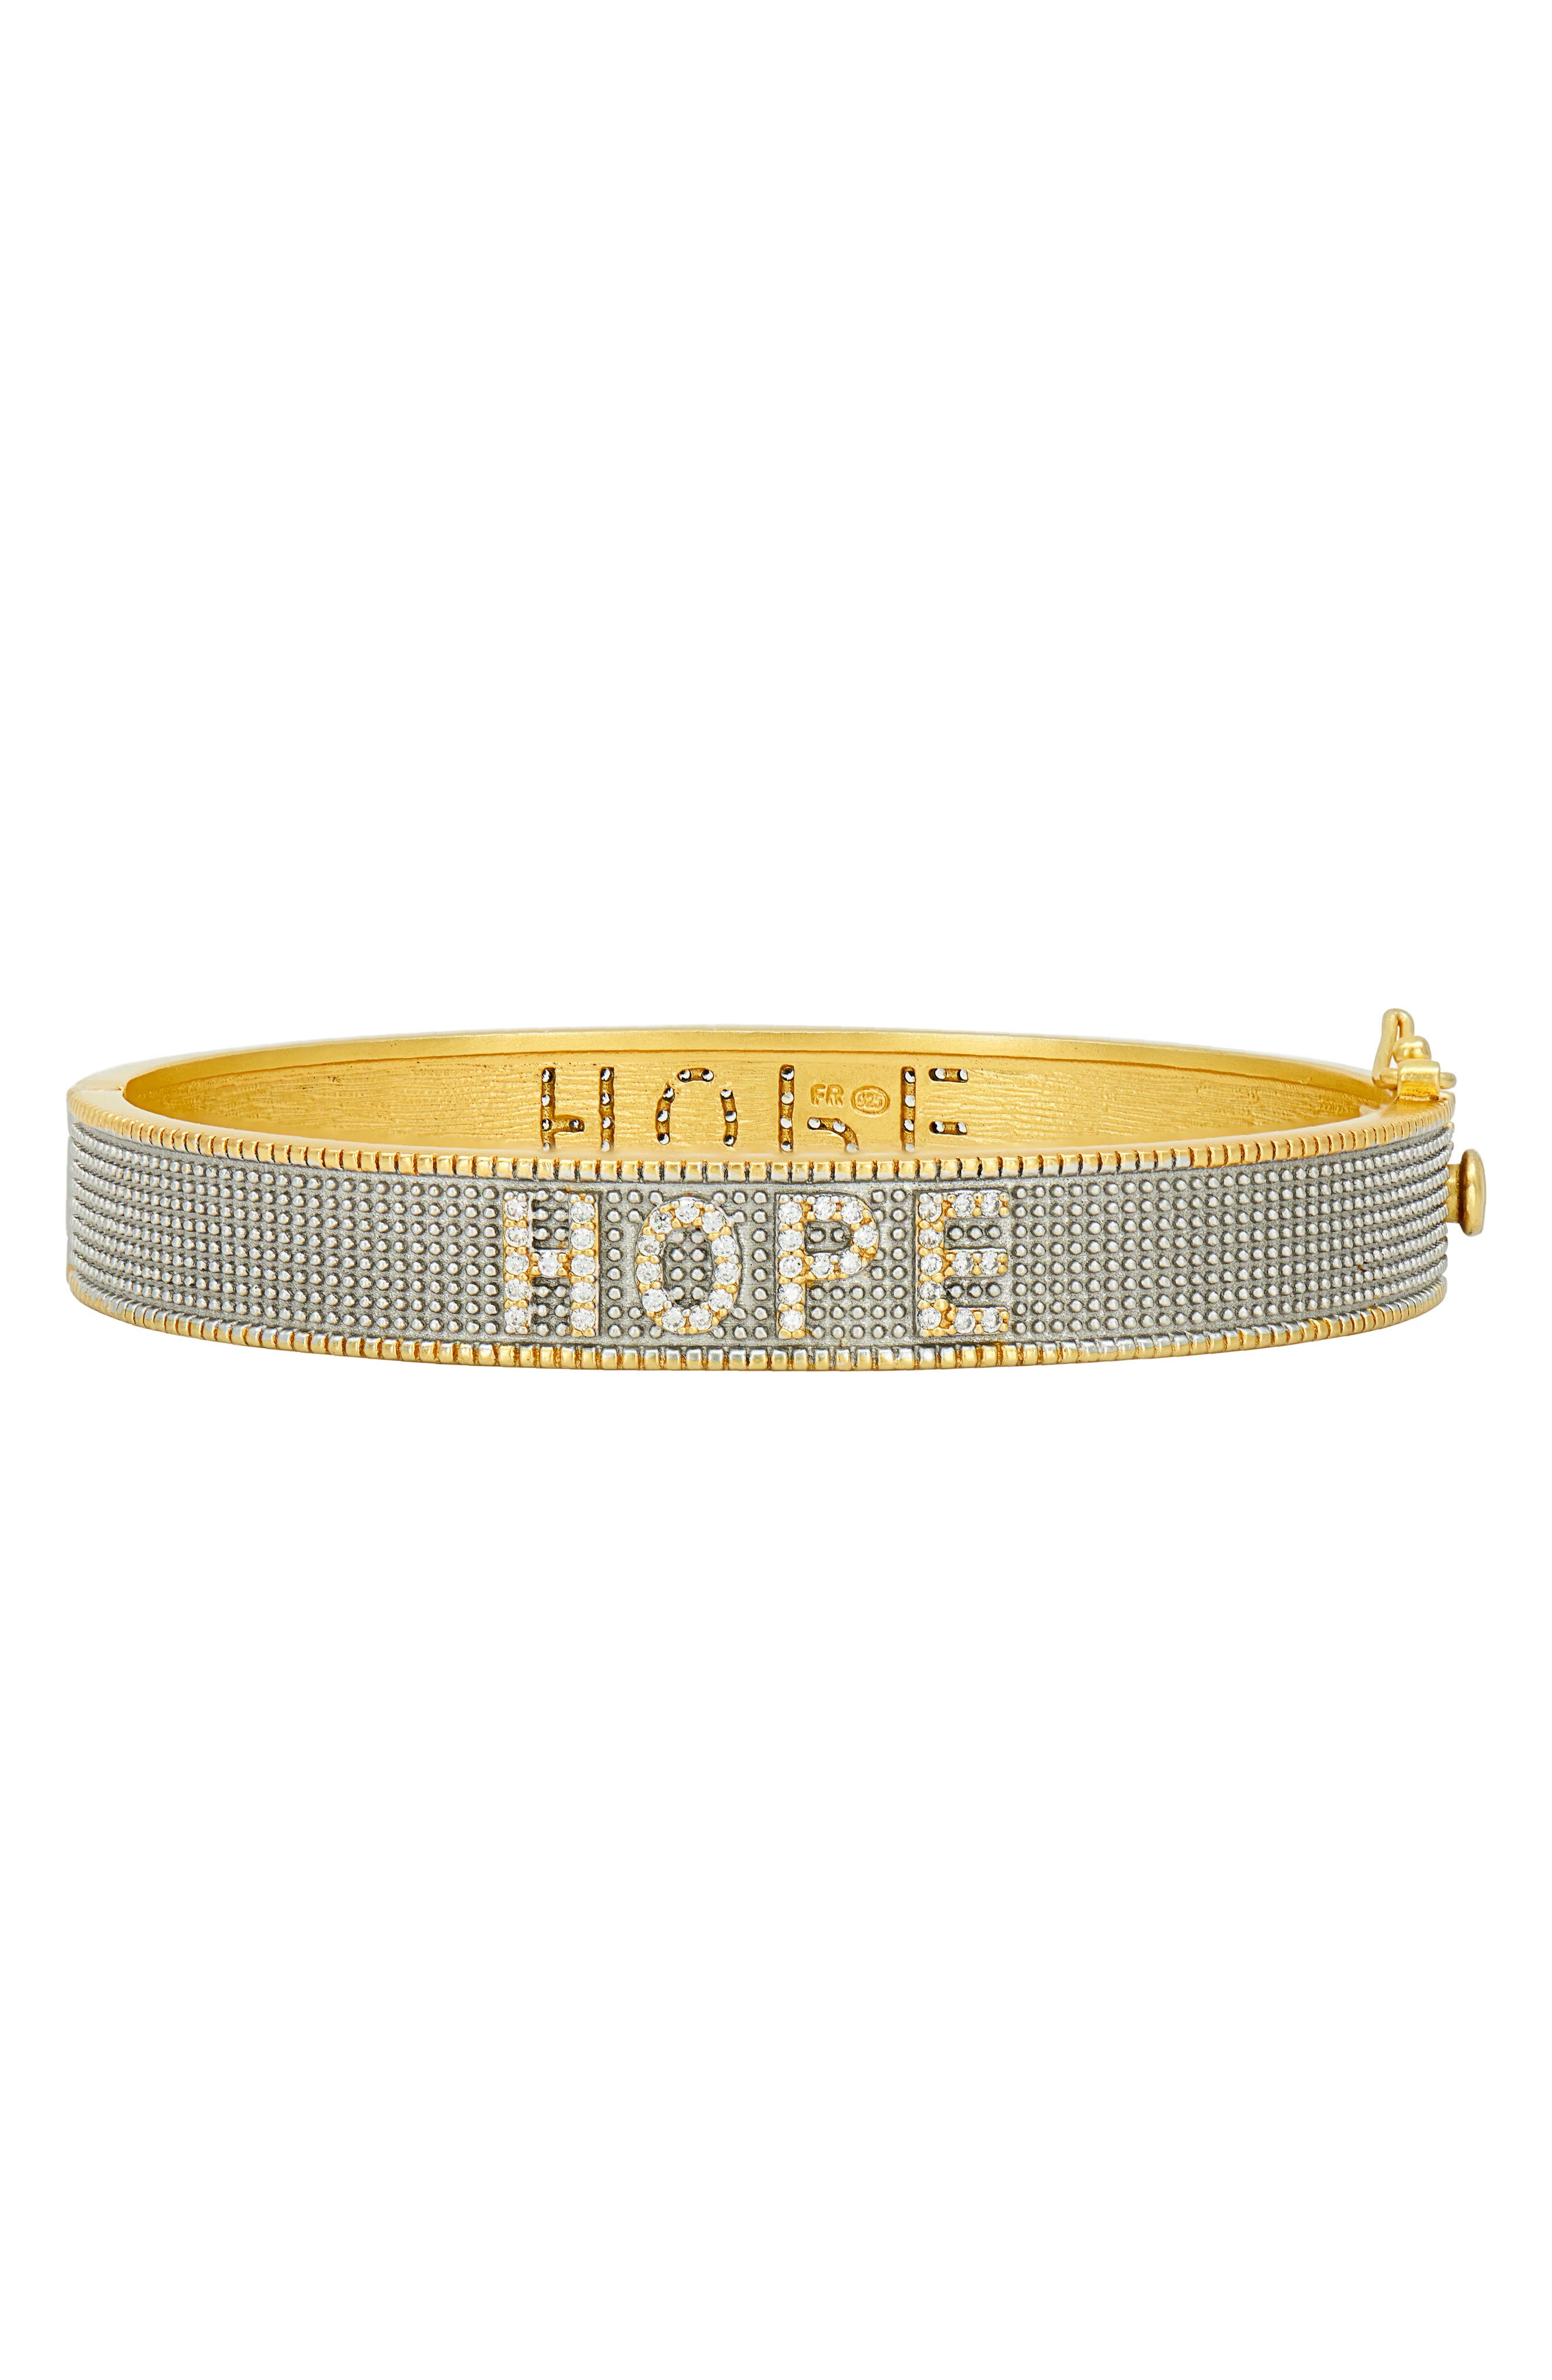 FREIDA ROTHMAN Hope Bracelet in Gold And Silver at Nordstrom -  AHPYZB03-H